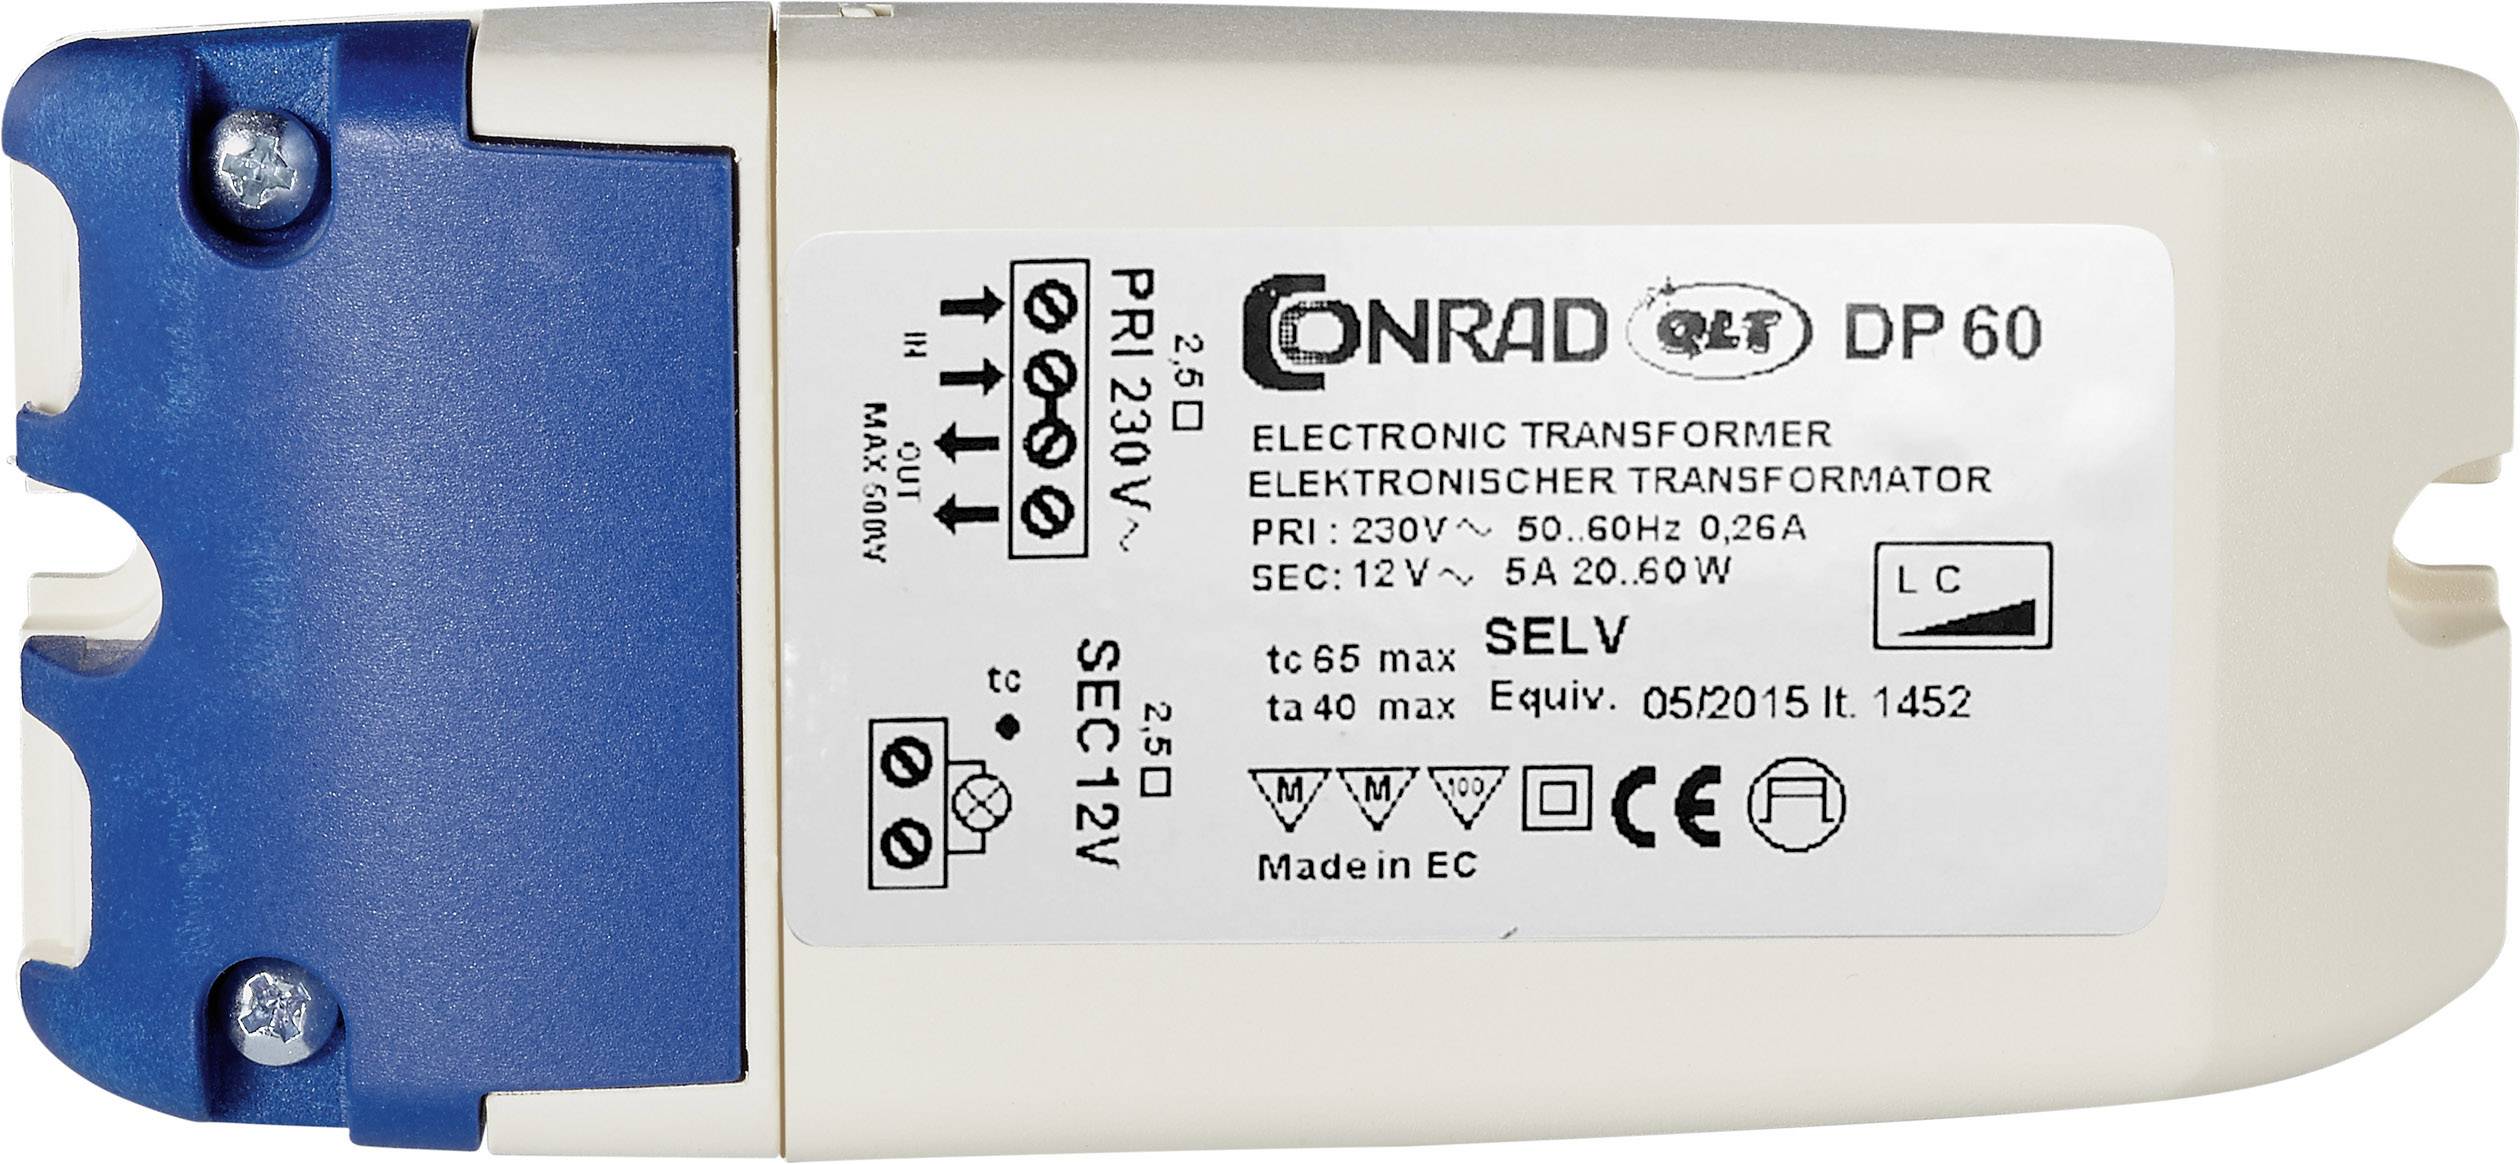 DP 105 transformer 12 V 20 - W Reverse phase-fired , Phase-fired control | Conrad.com